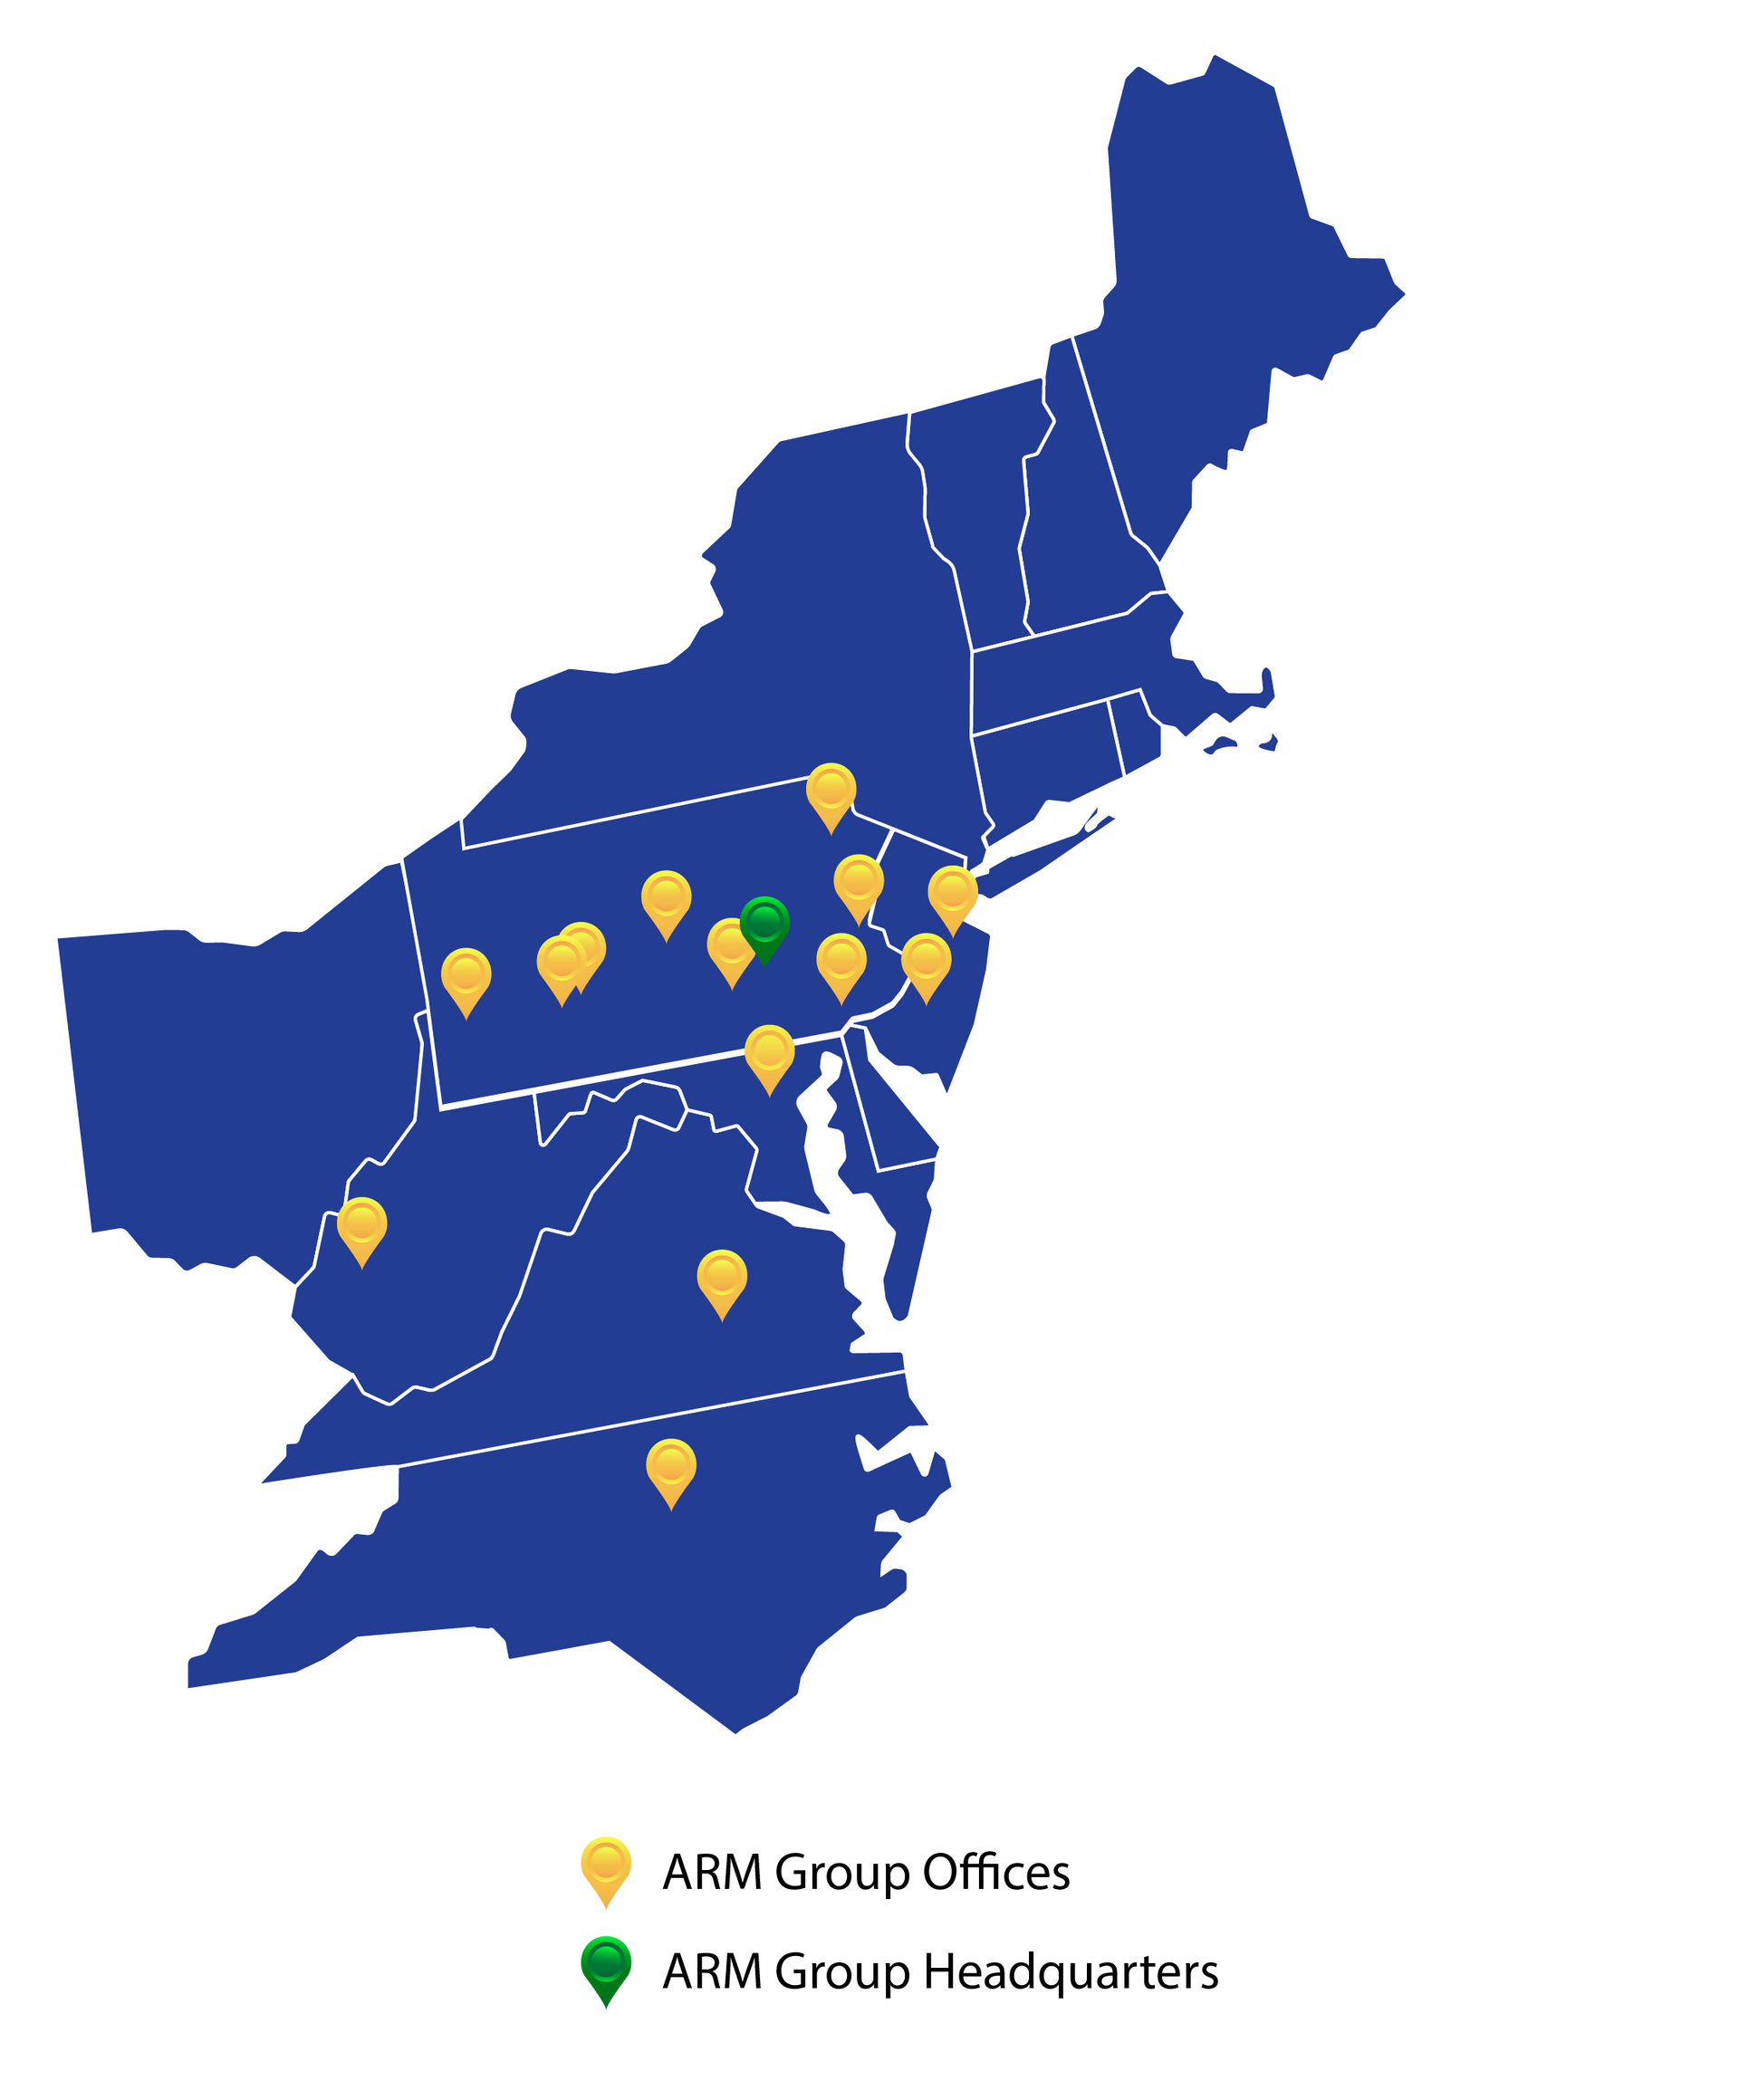 Blue vector map with pins for each office location for ARM Group Enterprises Inc.  A green pin for the Hershey, PA location, and yellow pins for all other 15 locations throughout the Mid-Atlantic.